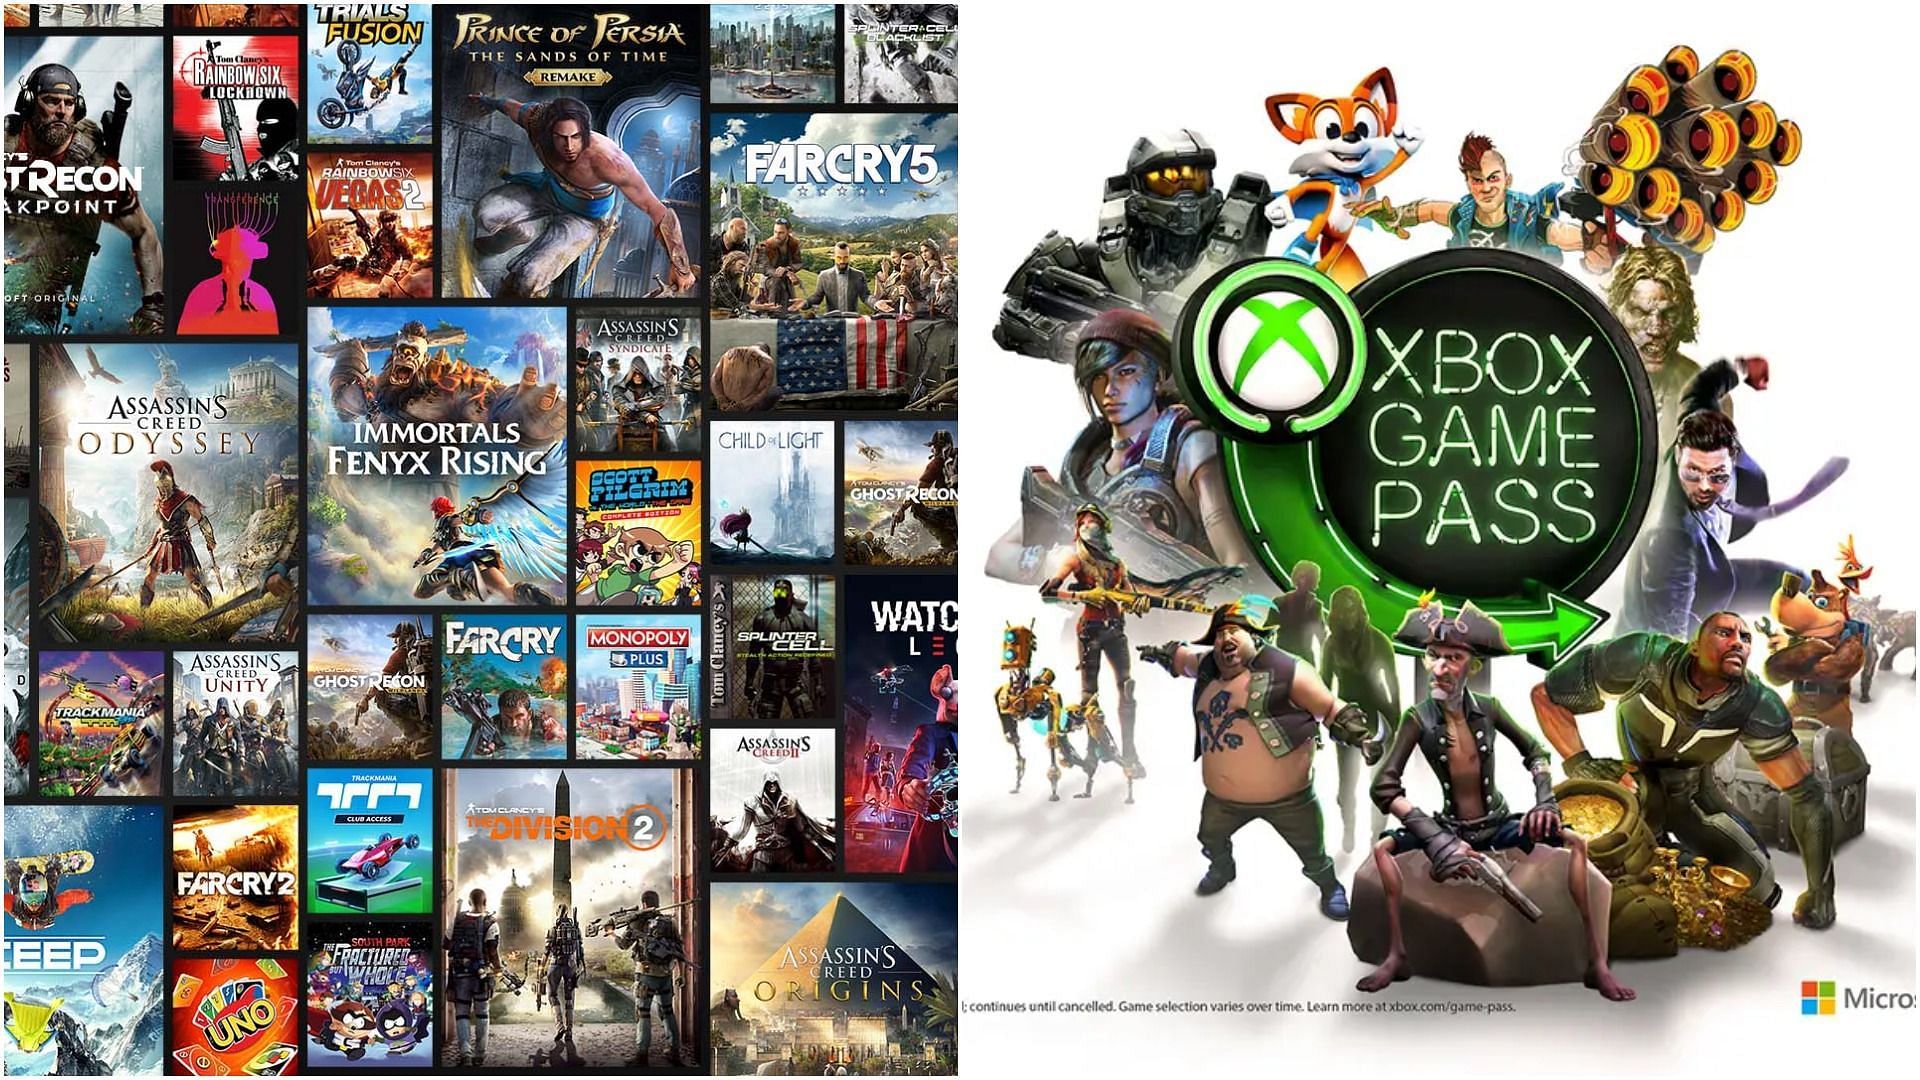 A response by Ubisoft Netherlands led to a major confusion (Images via Ubisoft, Microsoft)